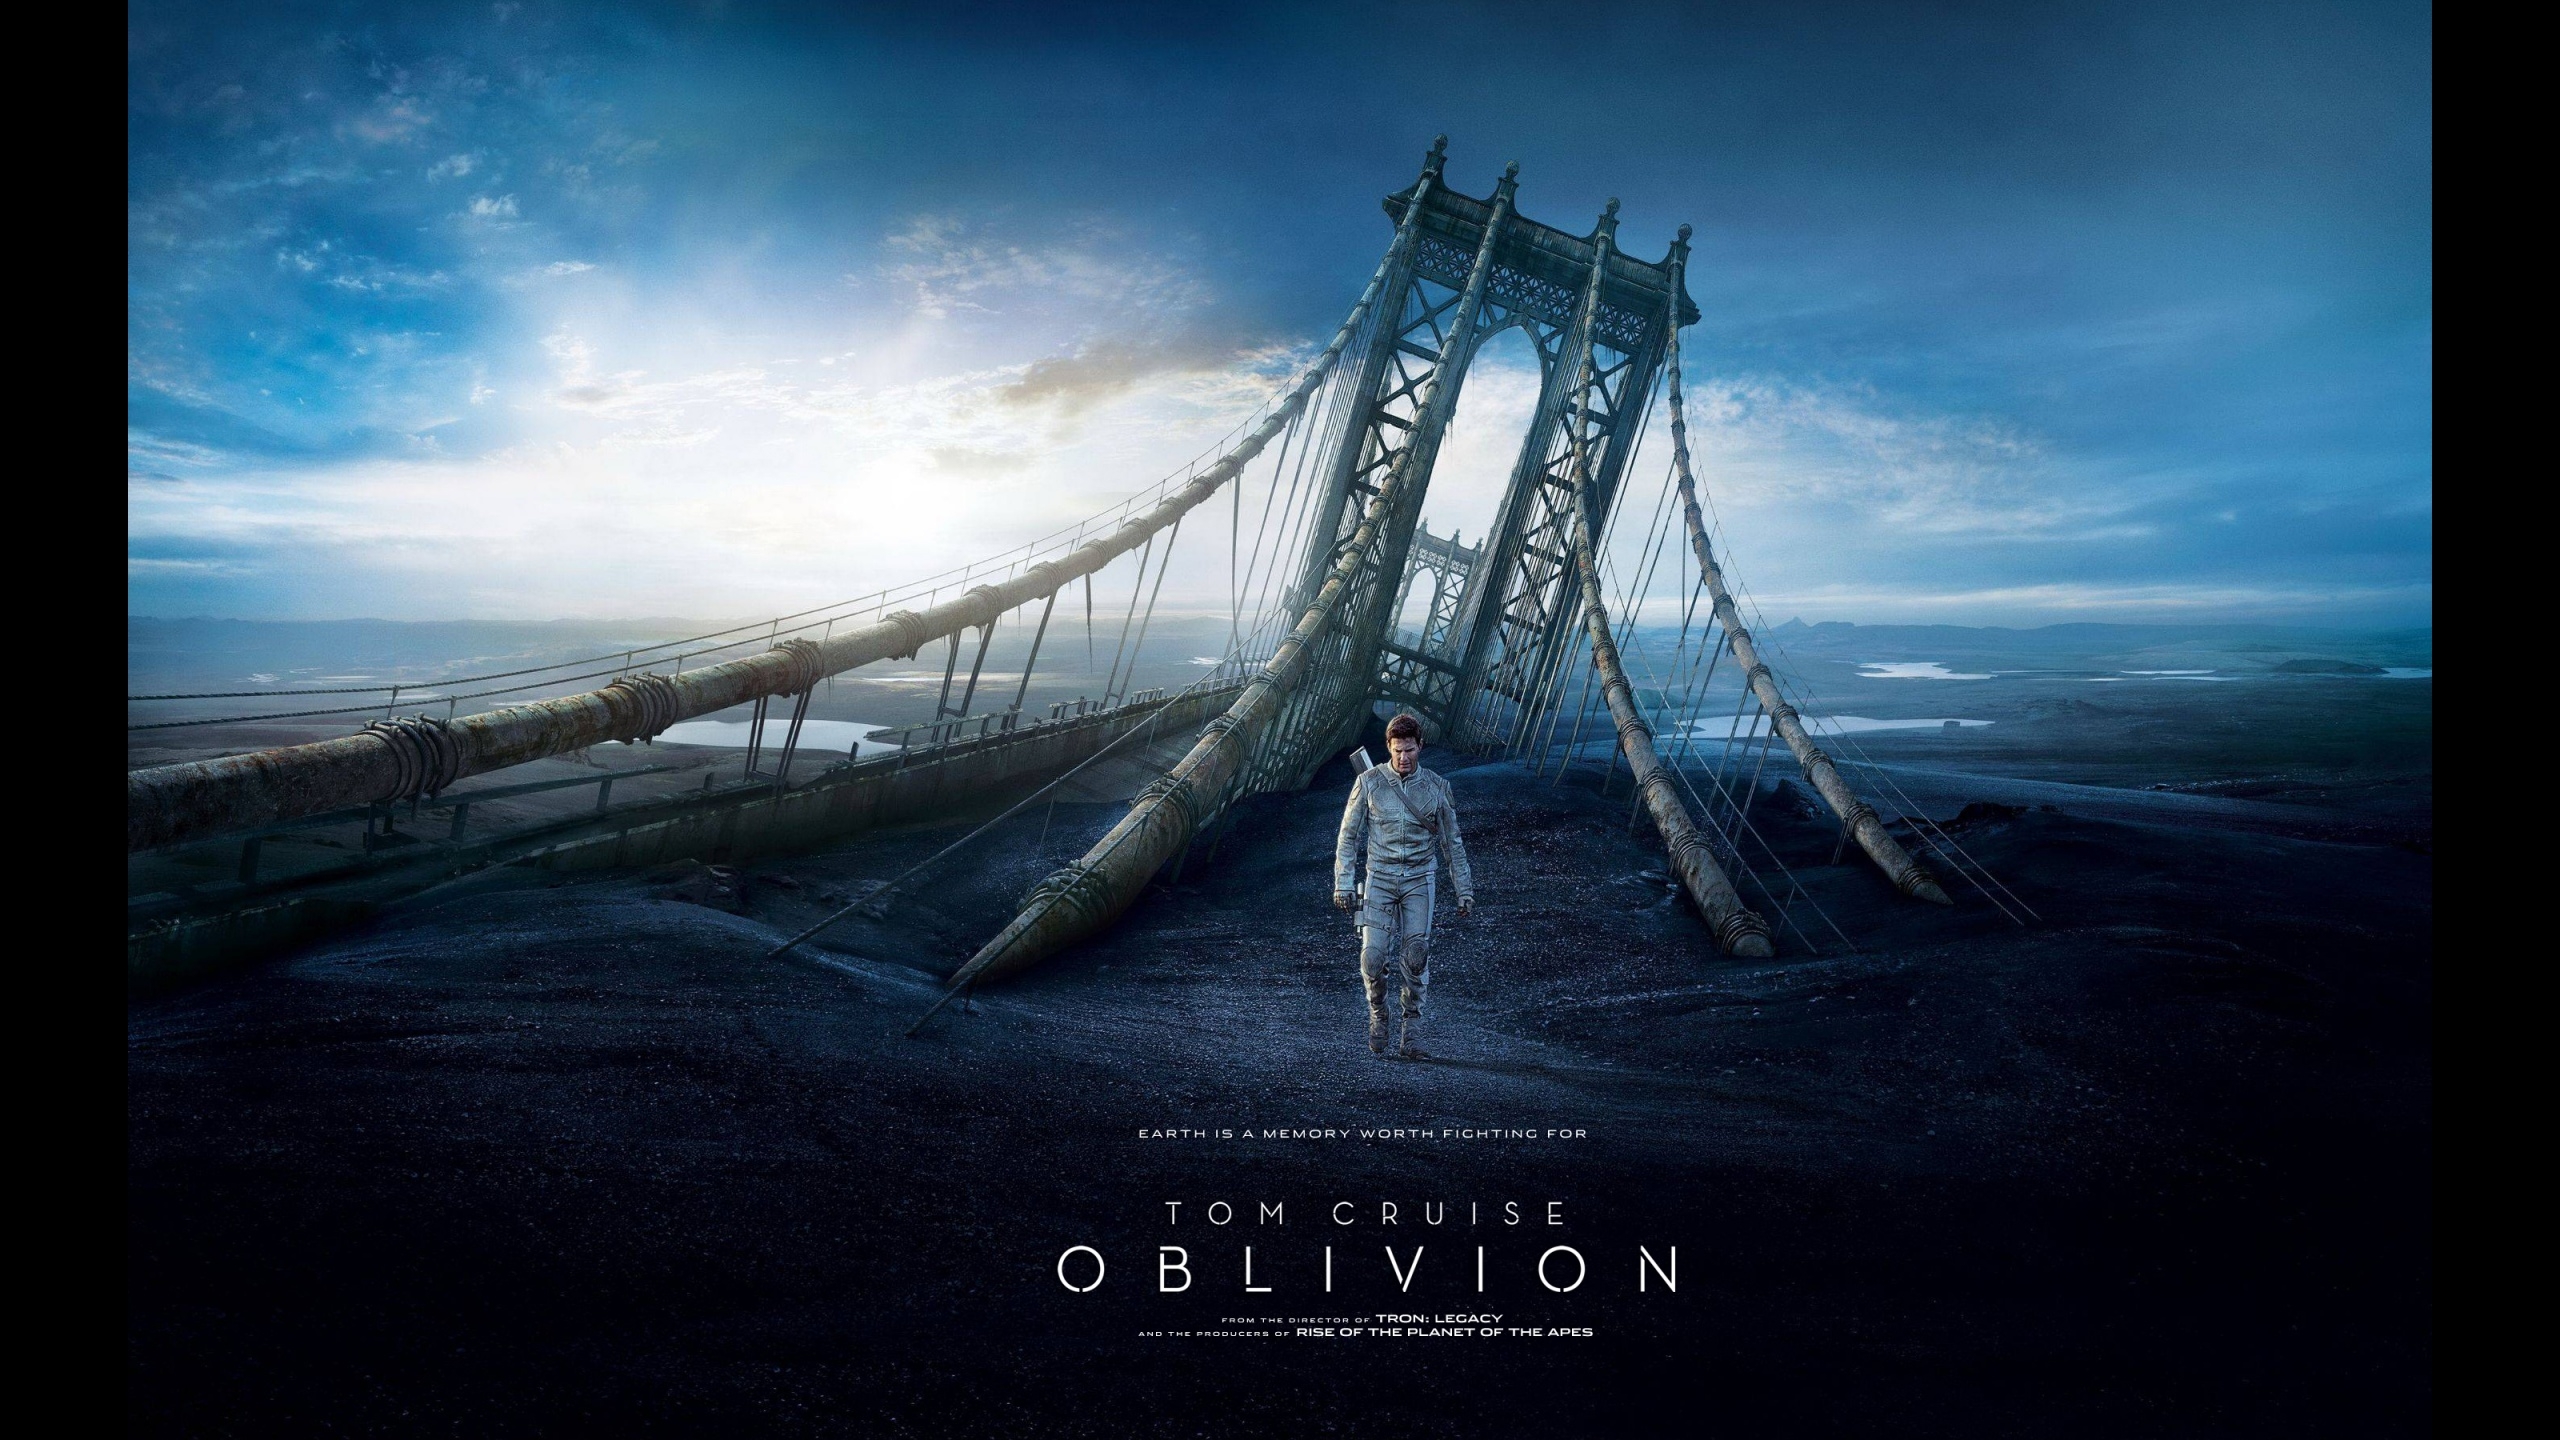 Movies Wallpapers Oblivion Movie 2013 6396 2560x1440 pixel Exotic